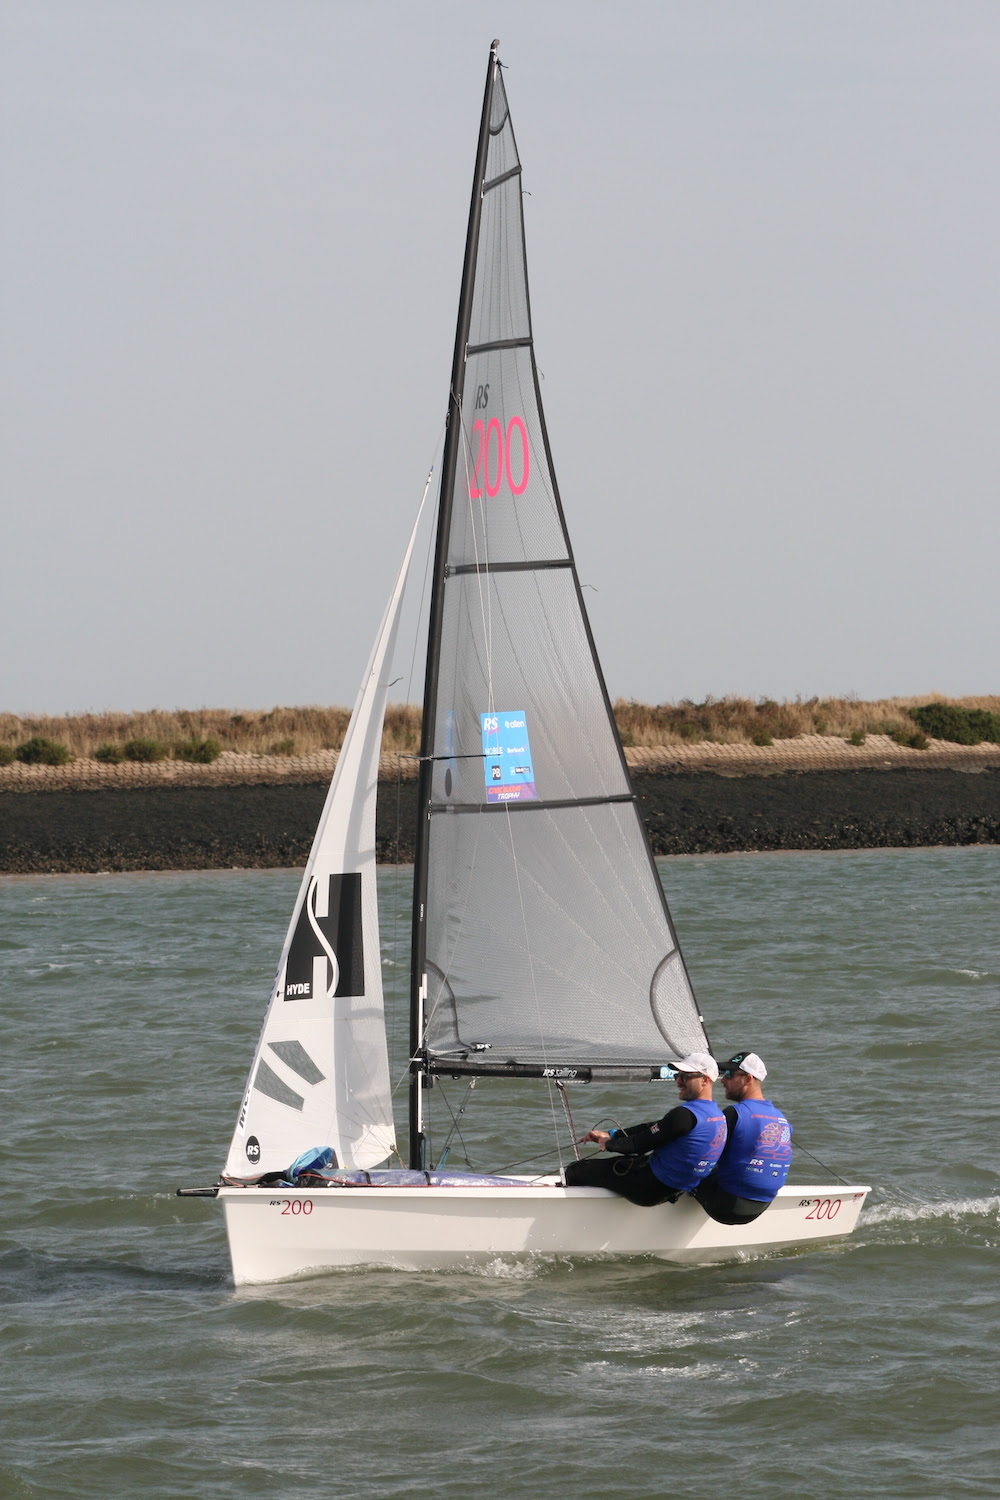 Christian Birrell and Luke Patience (Merlin Rocket) take a comfortable lead in race three – photo Sue Pelling 4 Benjamin Pascoe (7) in action downwind with his dad Sam (505) – photo Roger Mant